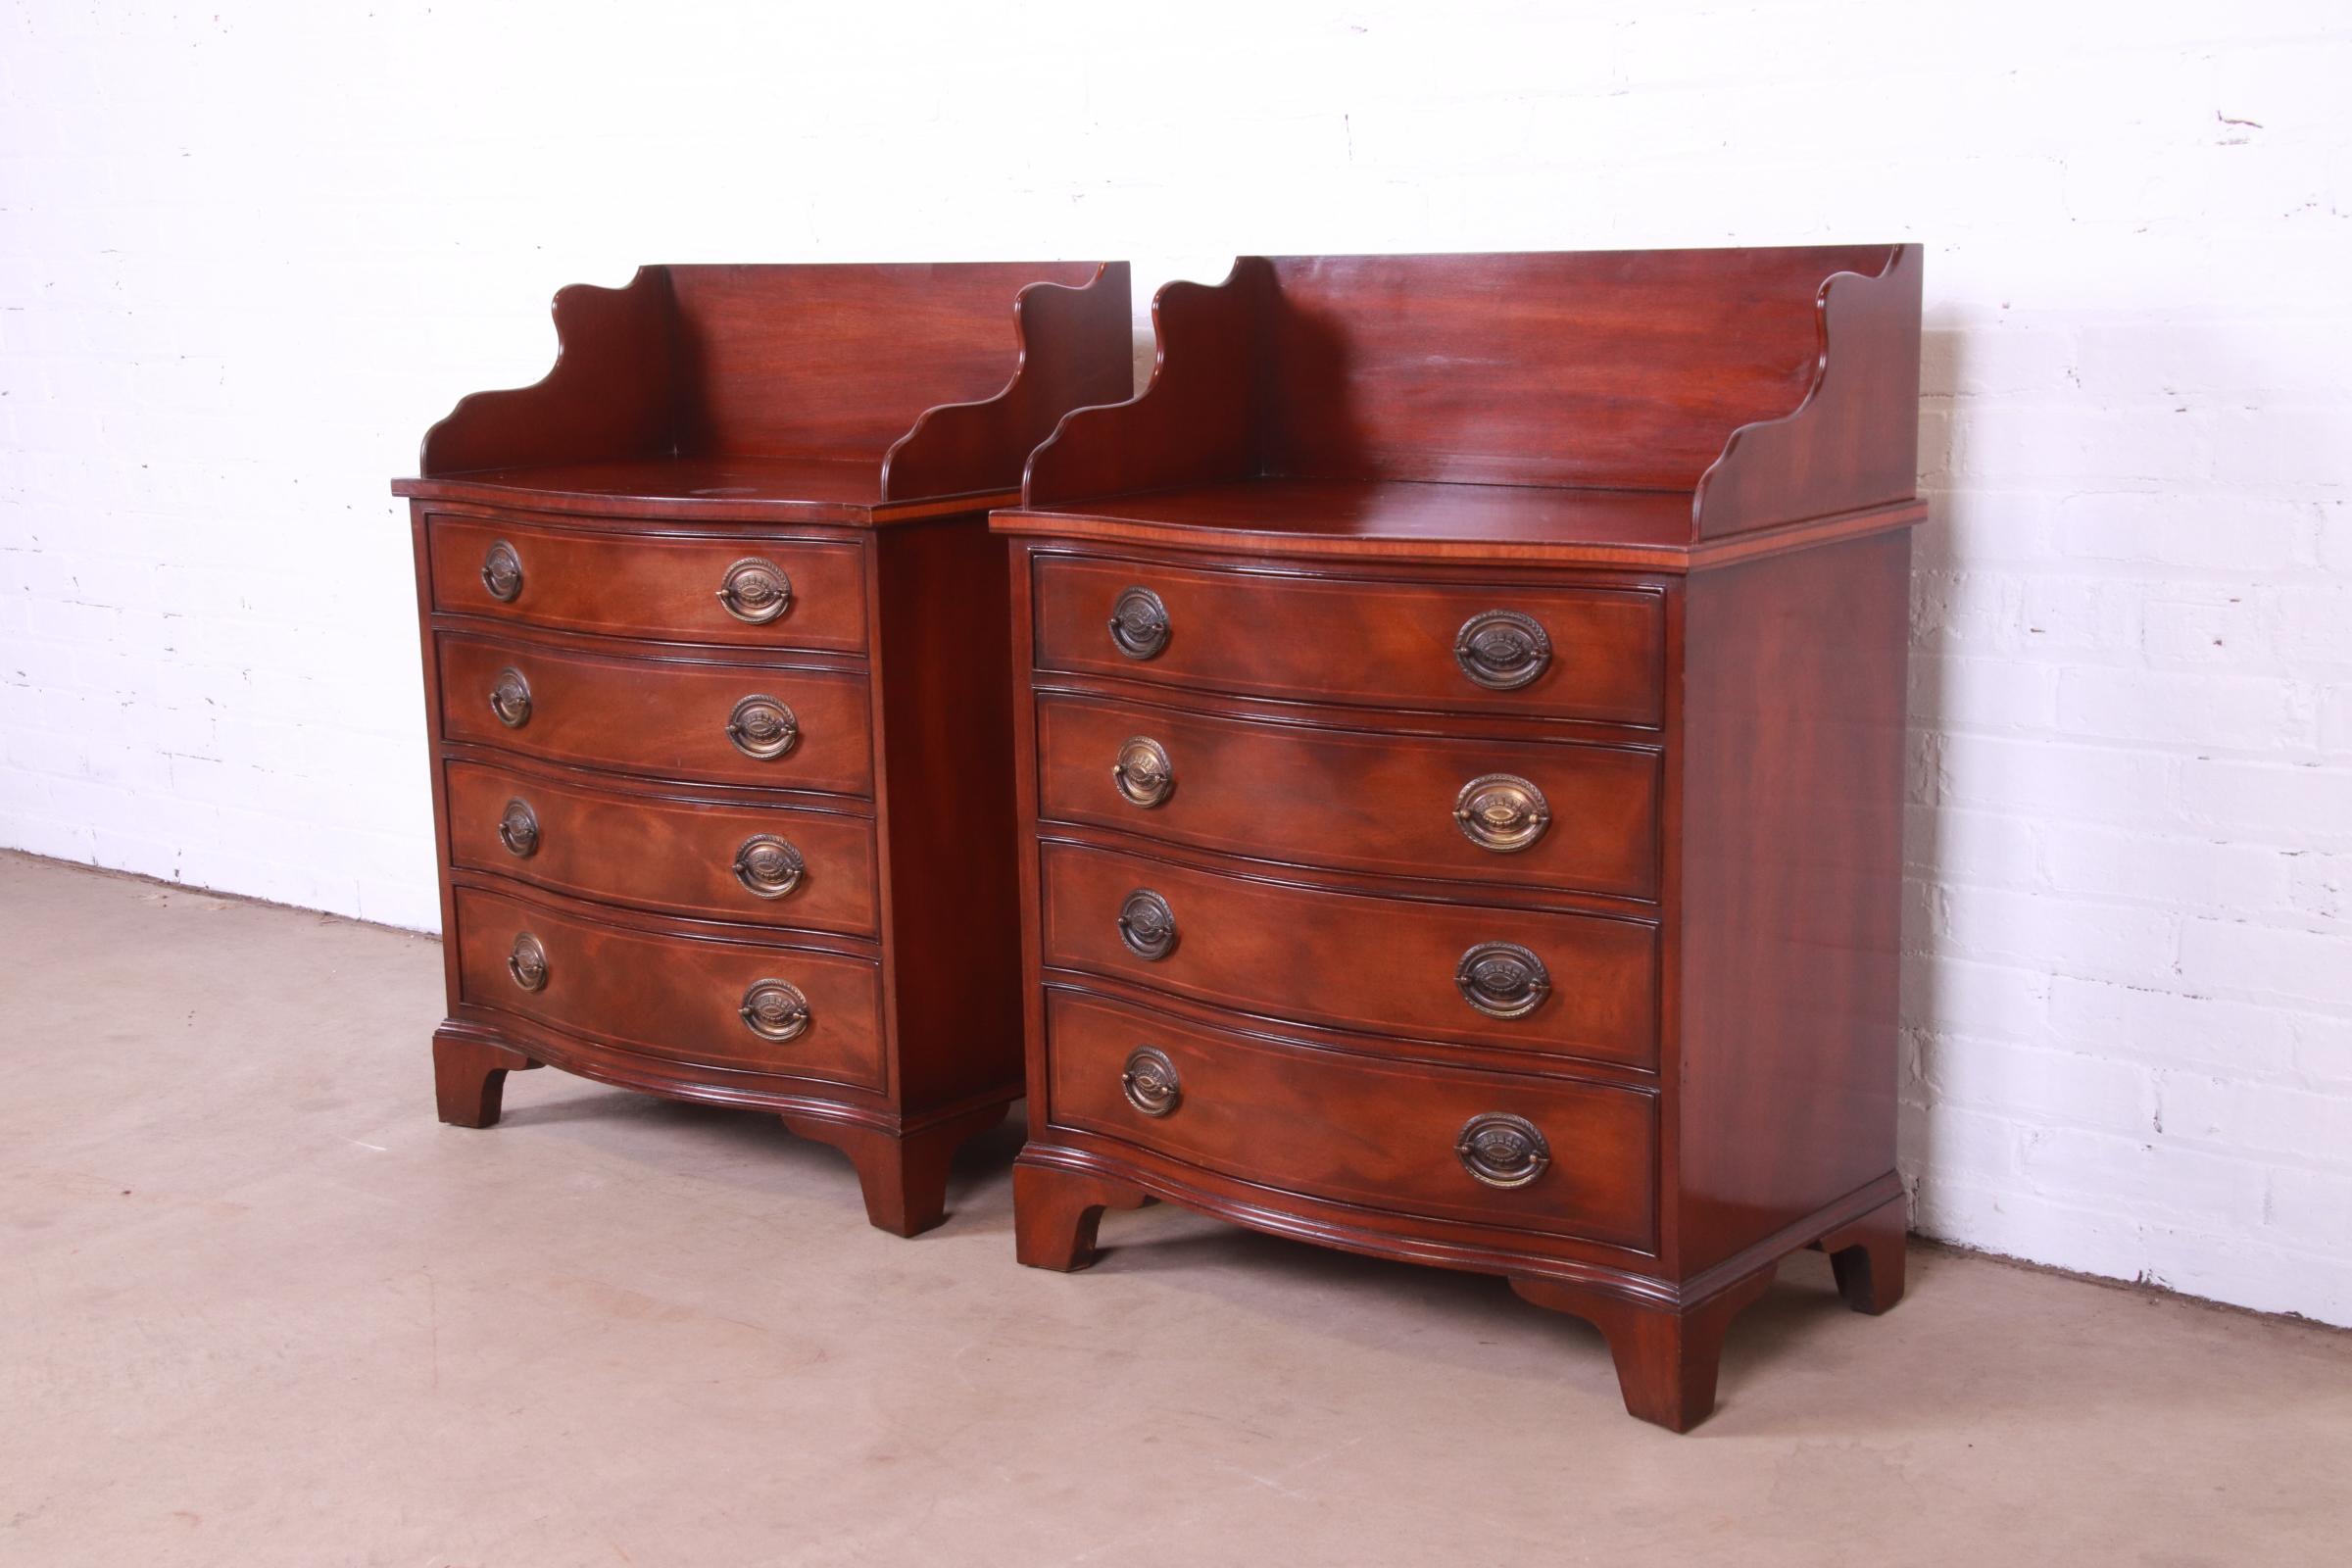 Henredon Georgian Inlaid Mahogany Serpentine Bachelor Chests or Nightstands In Good Condition For Sale In South Bend, IN